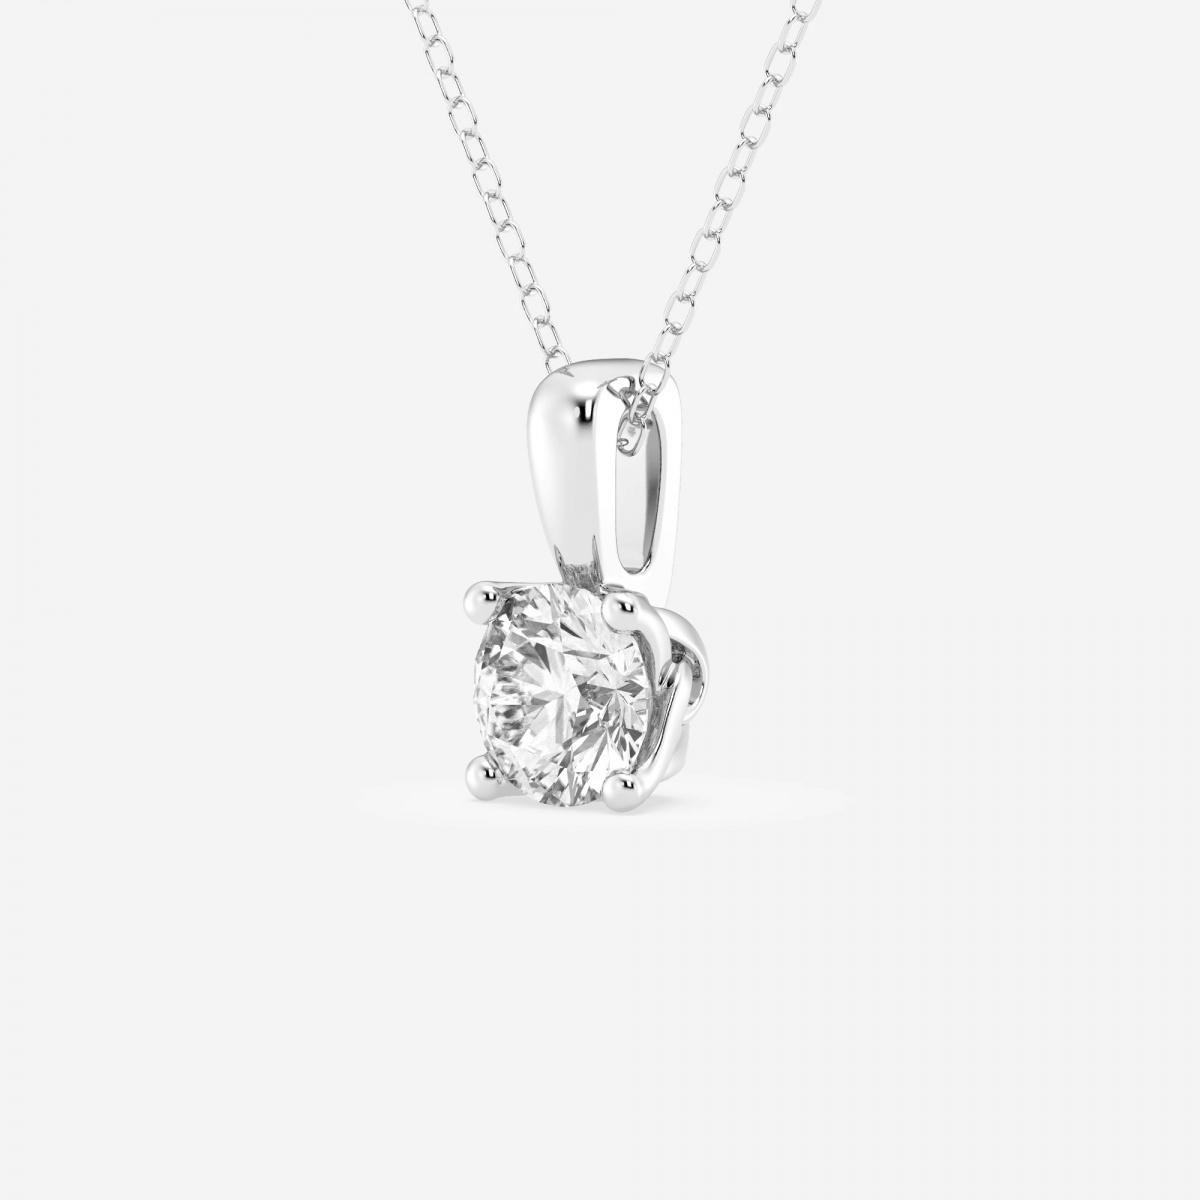 Additional Image 1 for  1 ctw Round Lab Grown Diamond Twisted Floral Solitaire Pendant with Adjustable Chain